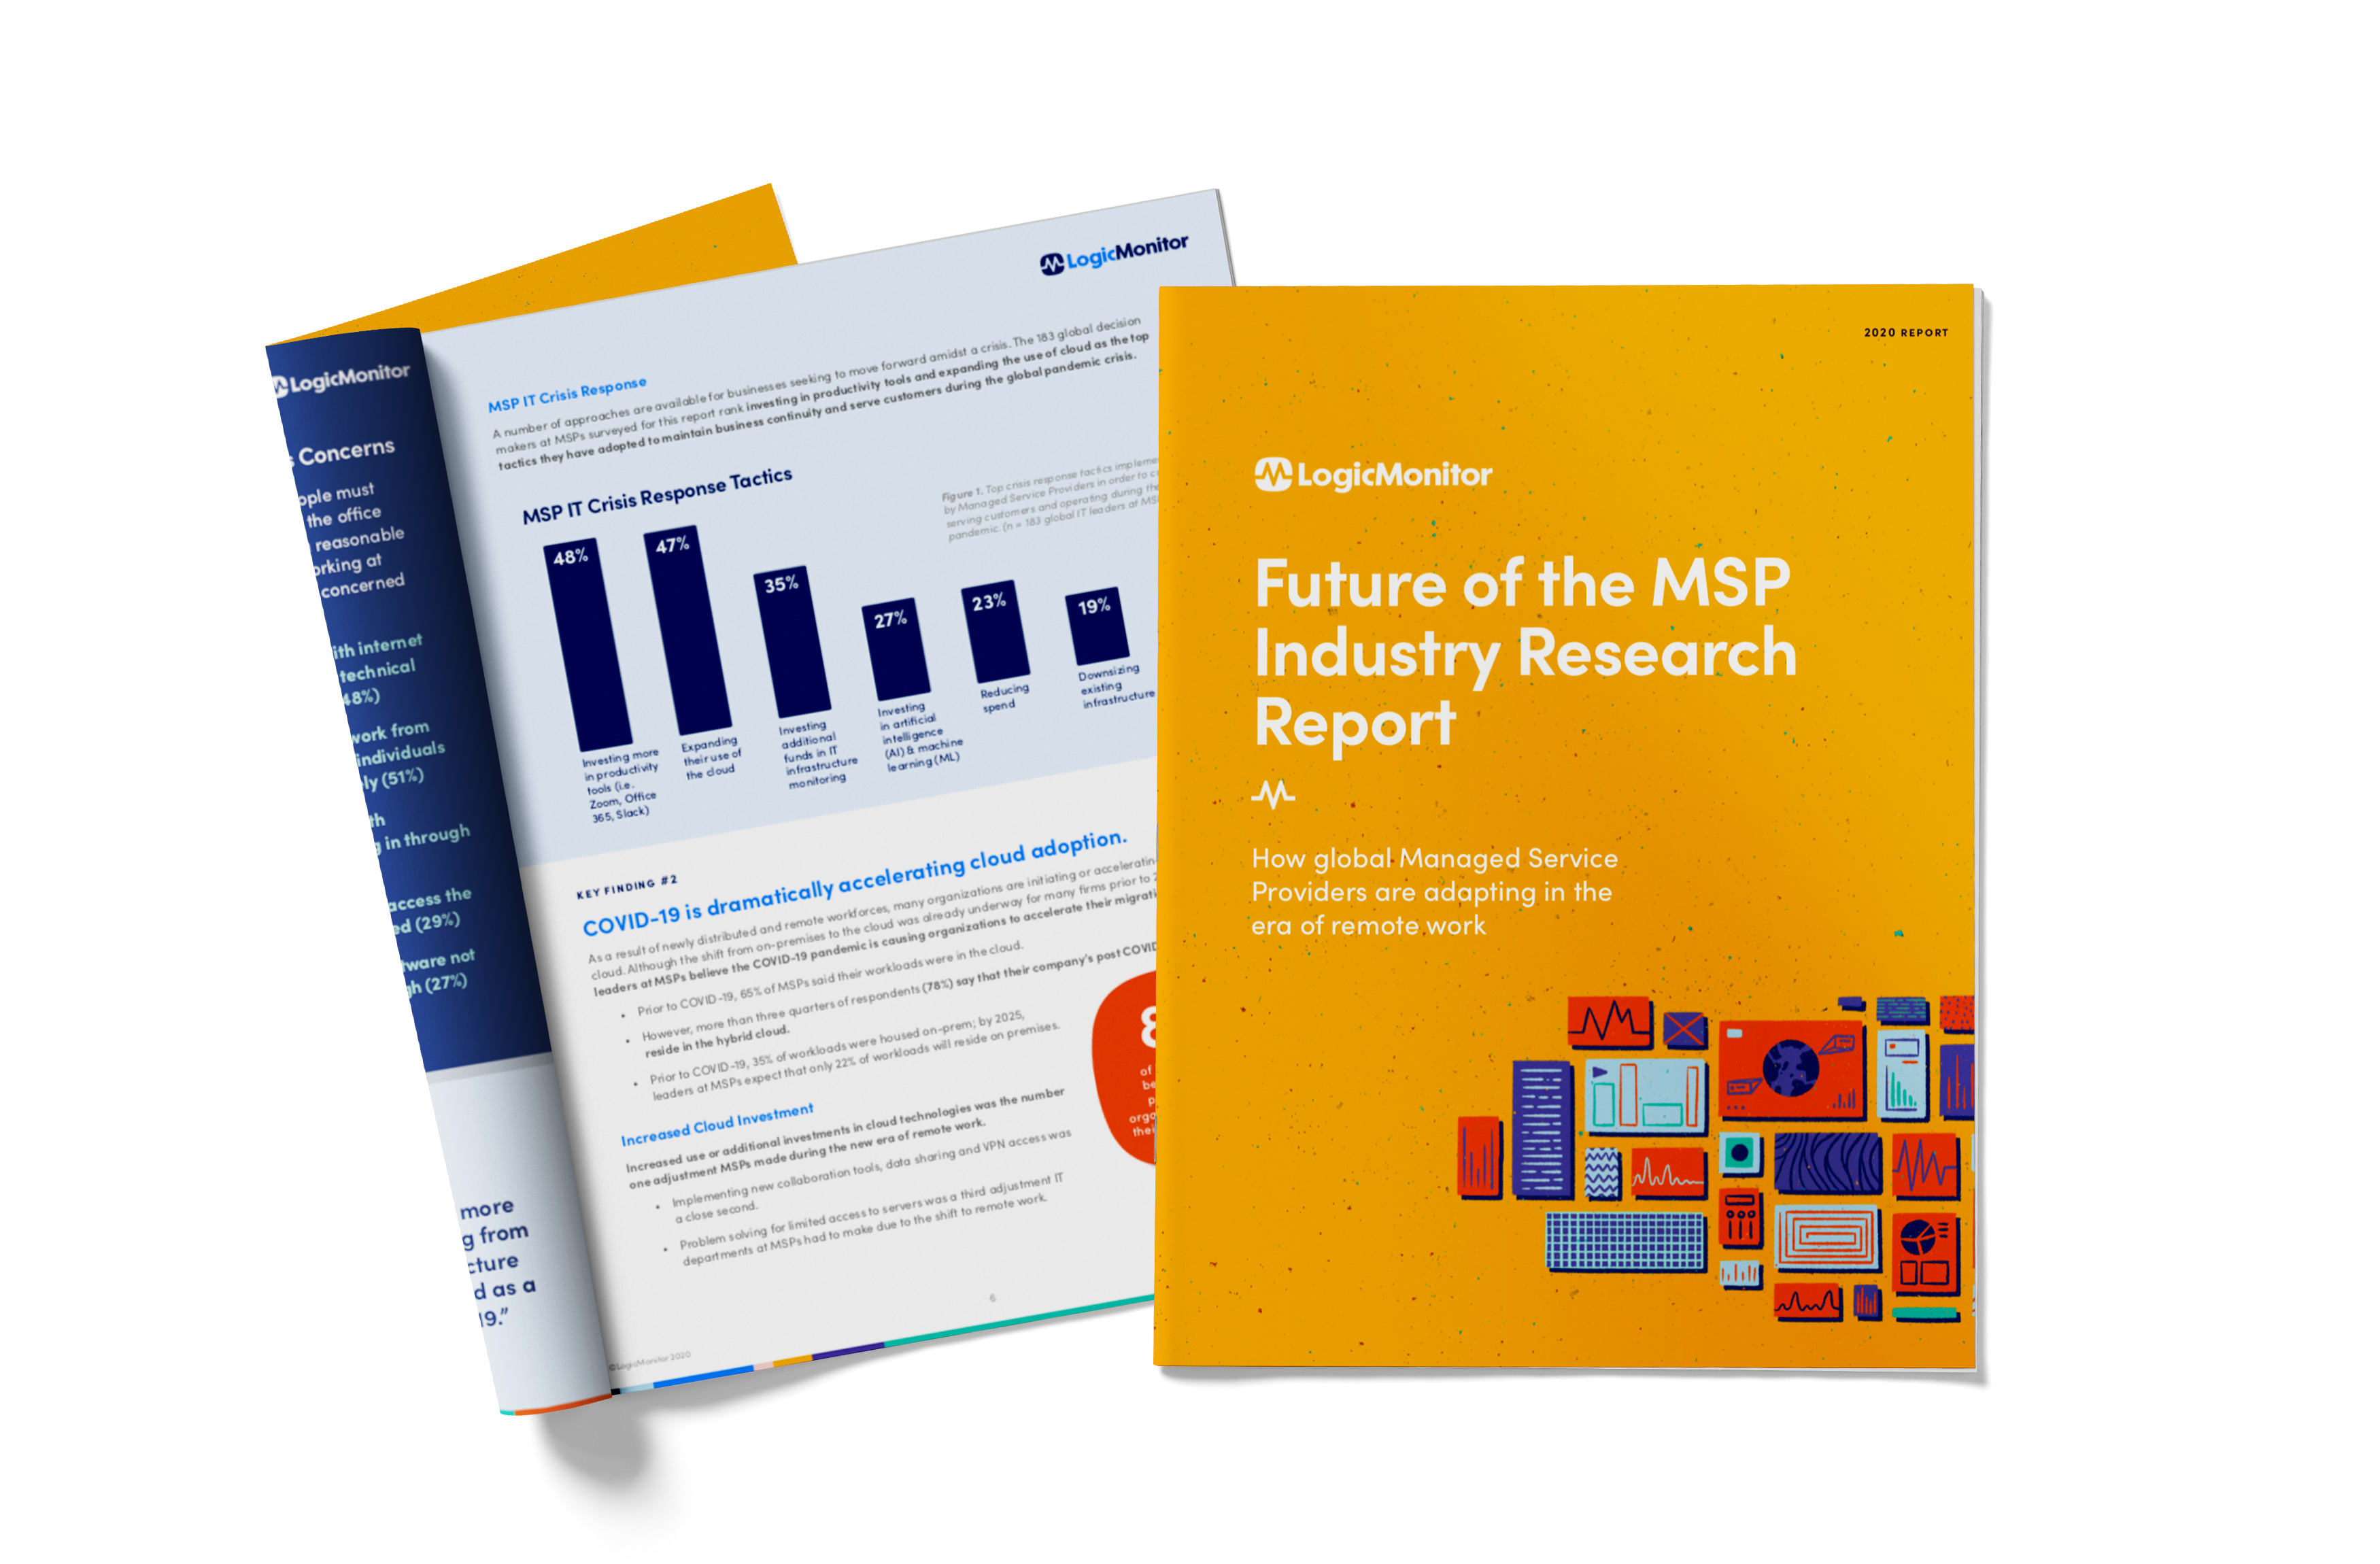 Future of the MSP Industry Research Report booklet